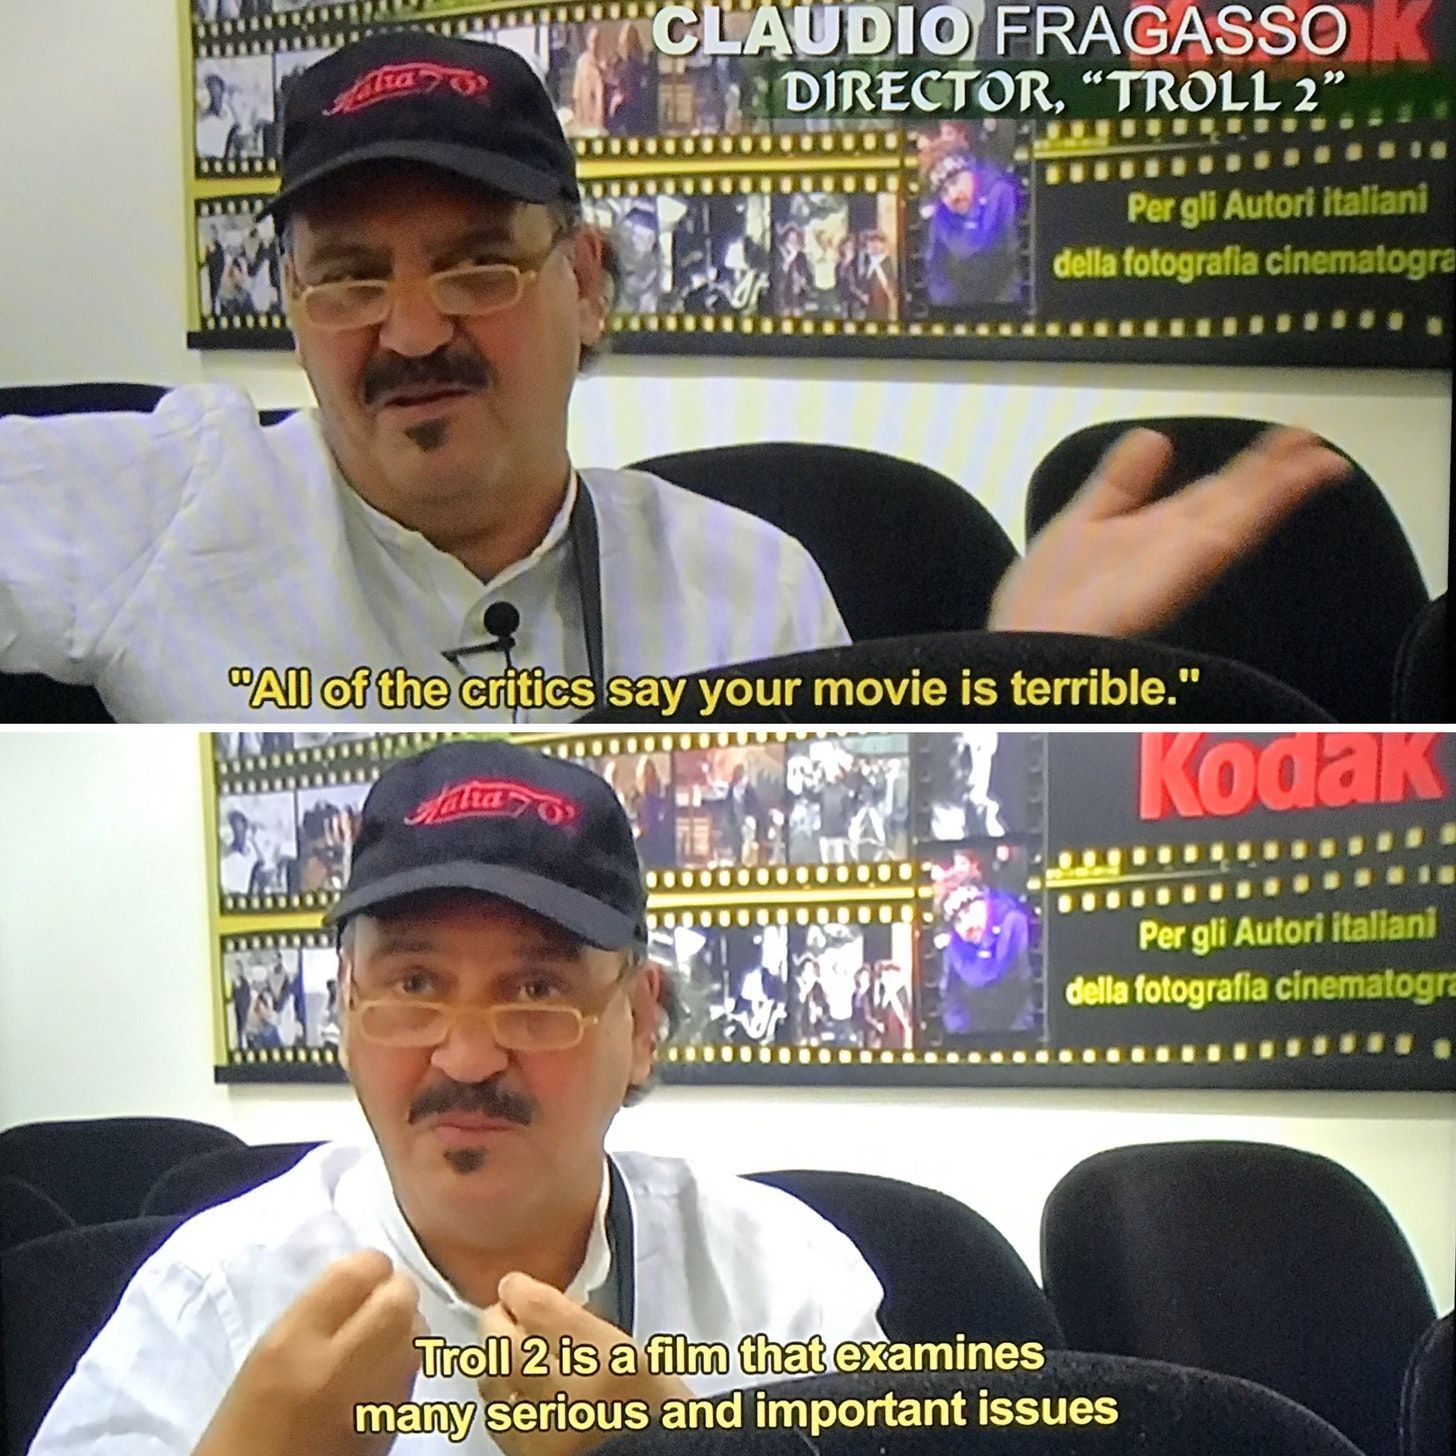 Two stills from Best Worst Movie, the documentary about the making of Troll 2. The top one is labeled “Claudio Fragasso, Director, Troll 2” and has a subtitle reading, “All of the critics say your movie is terrible.” The bottom still has a subtitle reading, “Troll 2 is a film that examines many serious and important issues.”